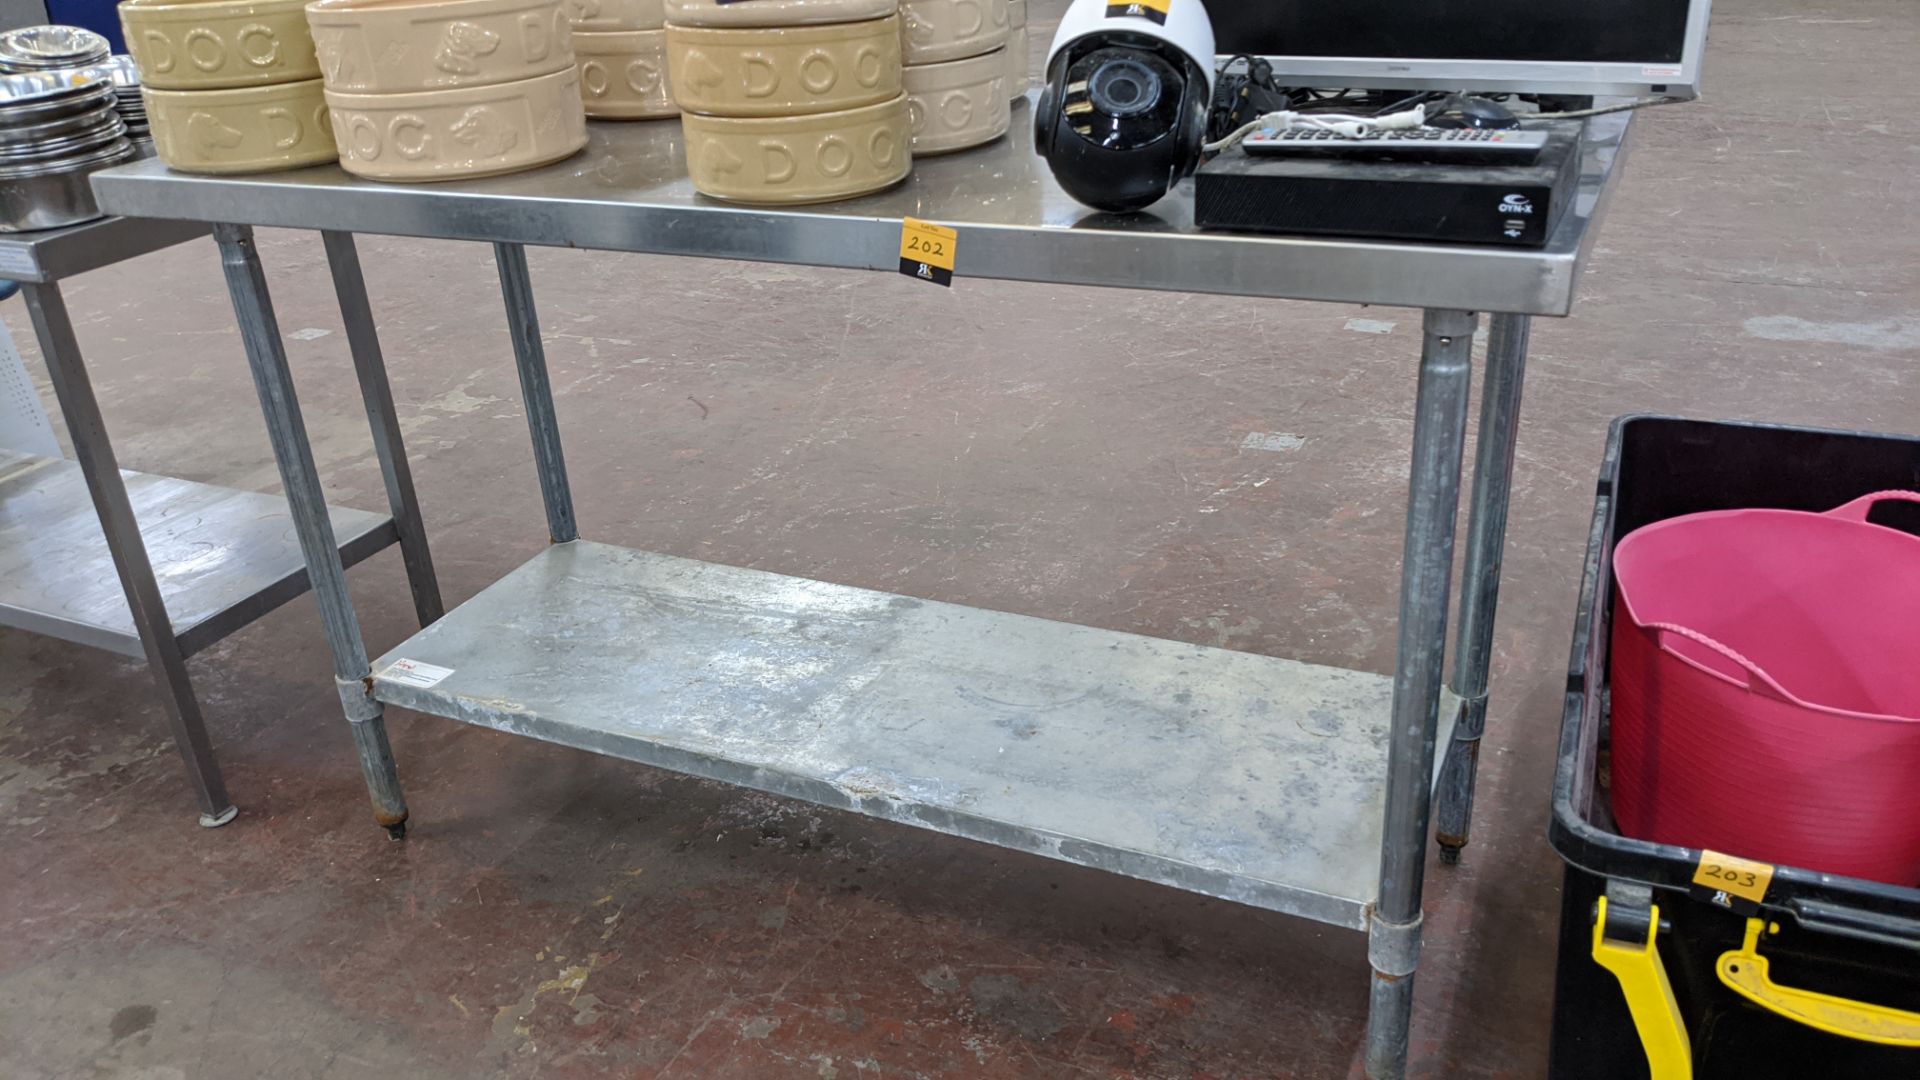 Twin tier stainless steel table measuring approximately 60" length, 24" depth, 36" height